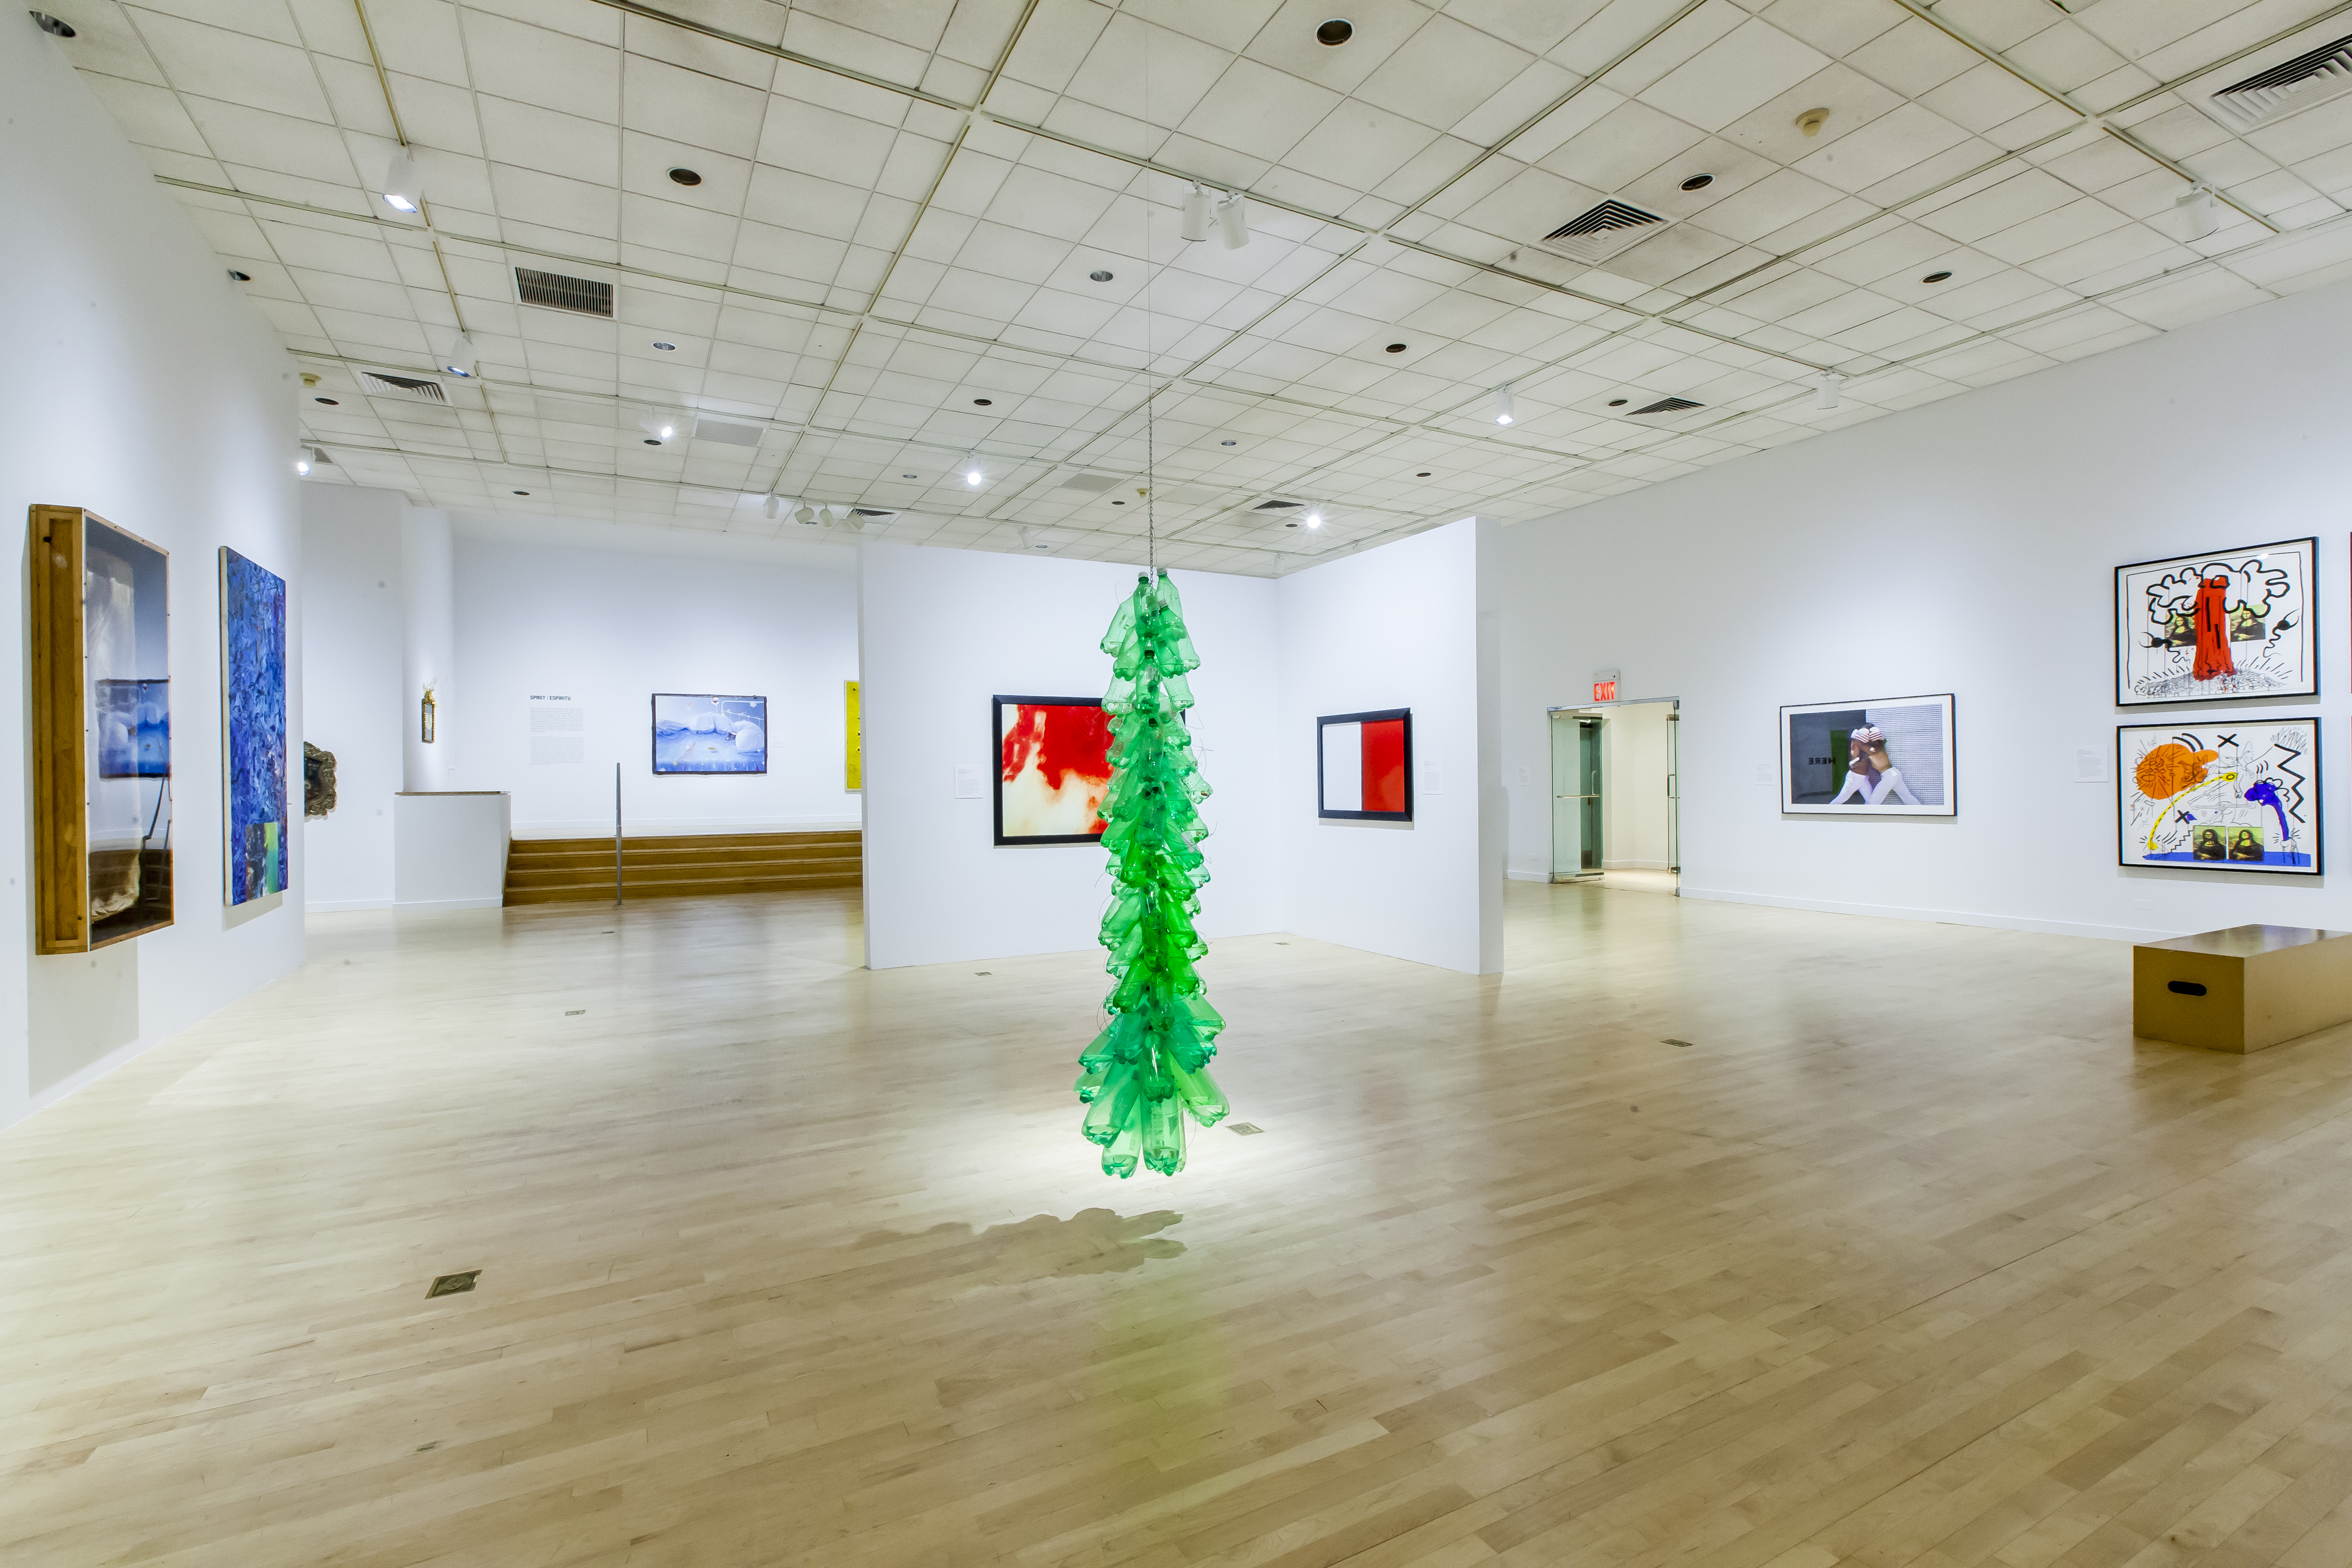 Installation view of Art AIDS America. Center: Tony Feher. Green Window, 2001. Plastic bottles with plastic caps, chain, wire, water, rope, dimensions variable. © Marisol Díaz, 2016.